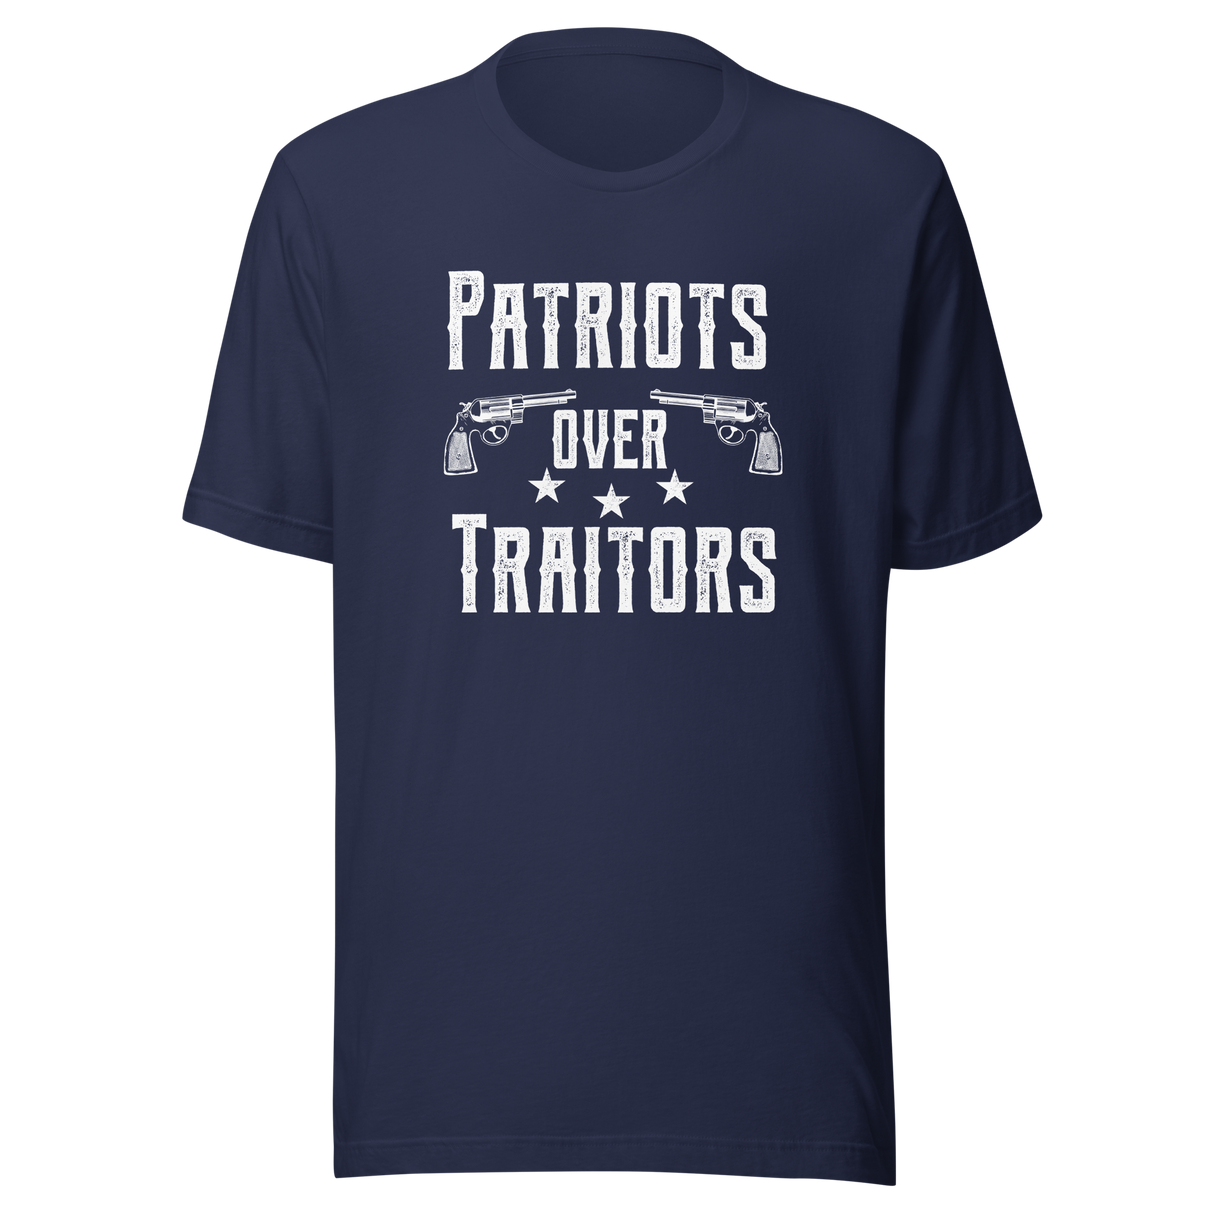 patriots-over-traitors-traitors-tee-republic-t-shirt-we-the-people-tee-t-shirt-tee#color_navy